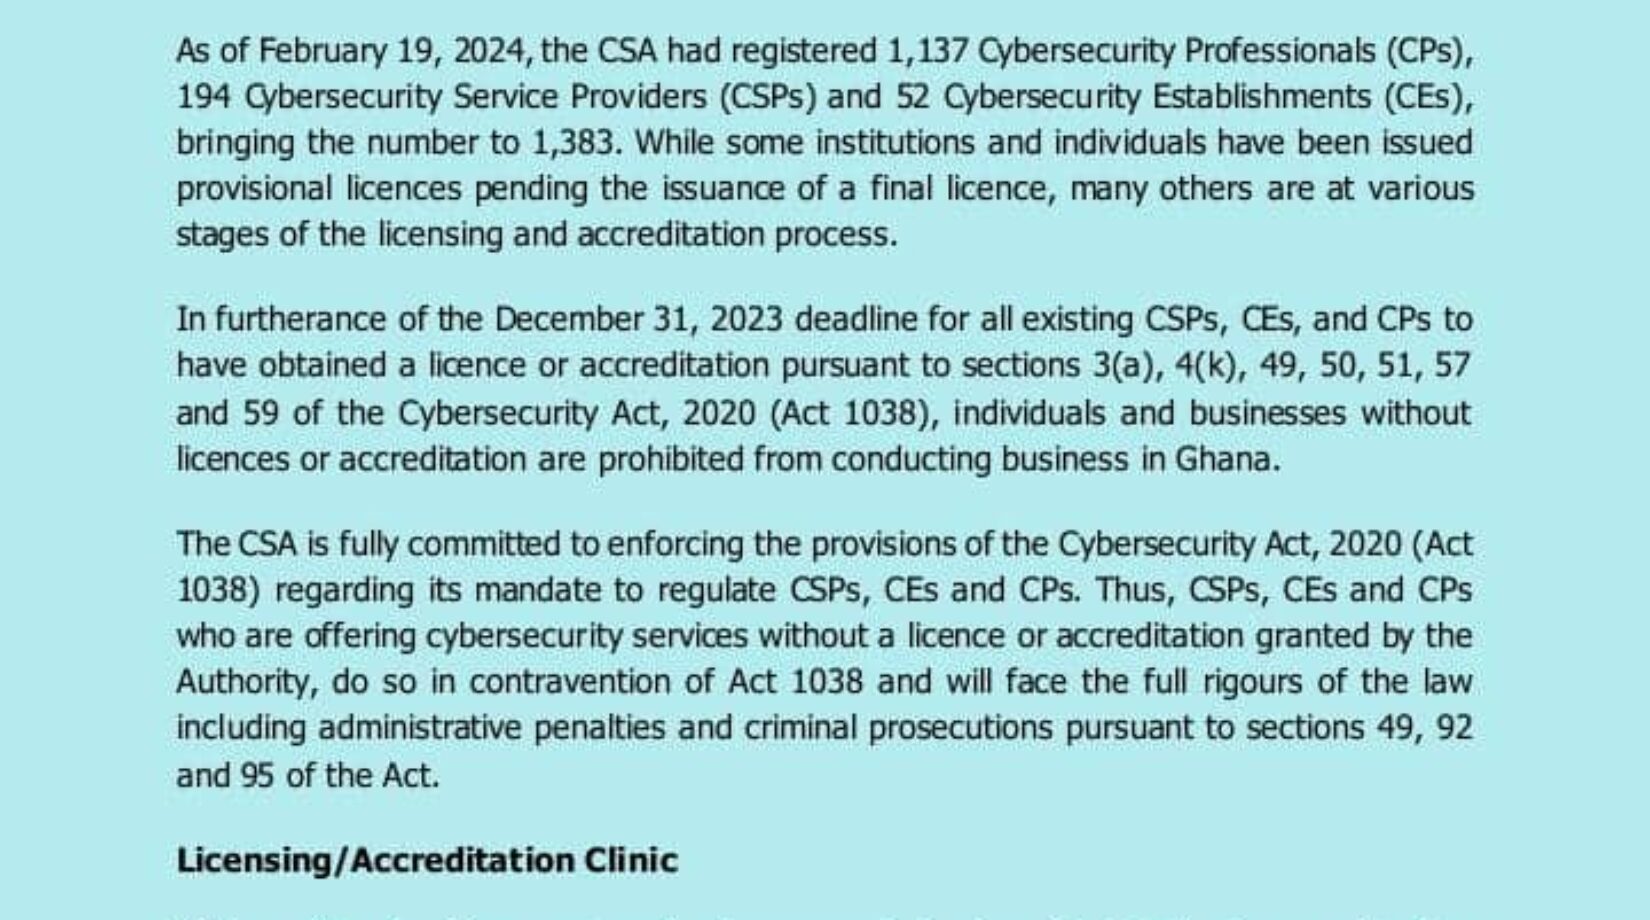 ABOUT 1,400 INSTITUTIONS AND INDIVIDUALS SEEK LICENCES/ACCREDITATIONS FROM CYBER SECURITY AUTHORITY (CSA)